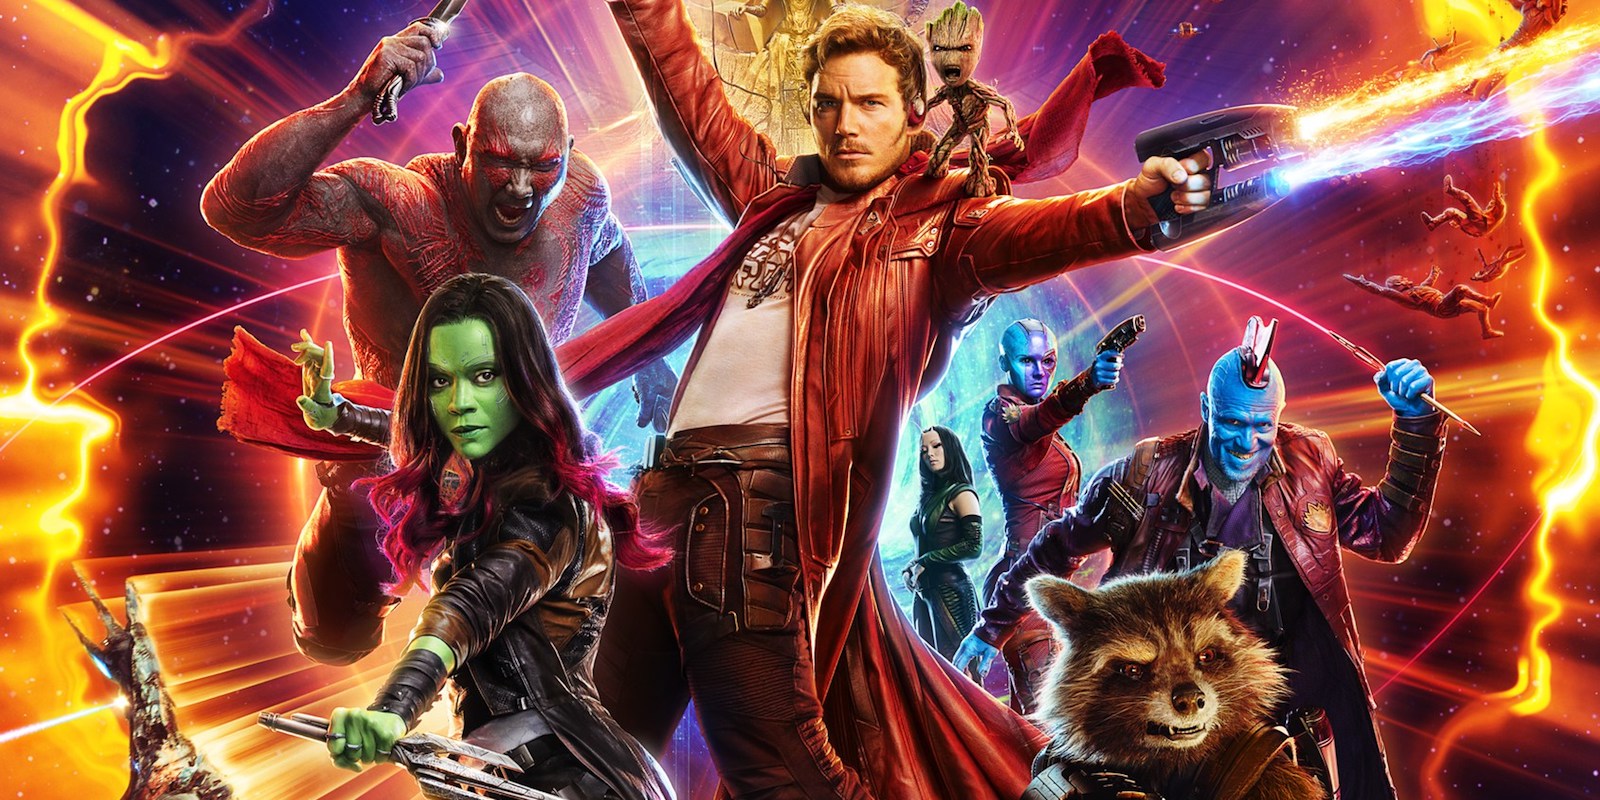 Spoiler-Free Review: Guardians of the Galaxy Vol. 2